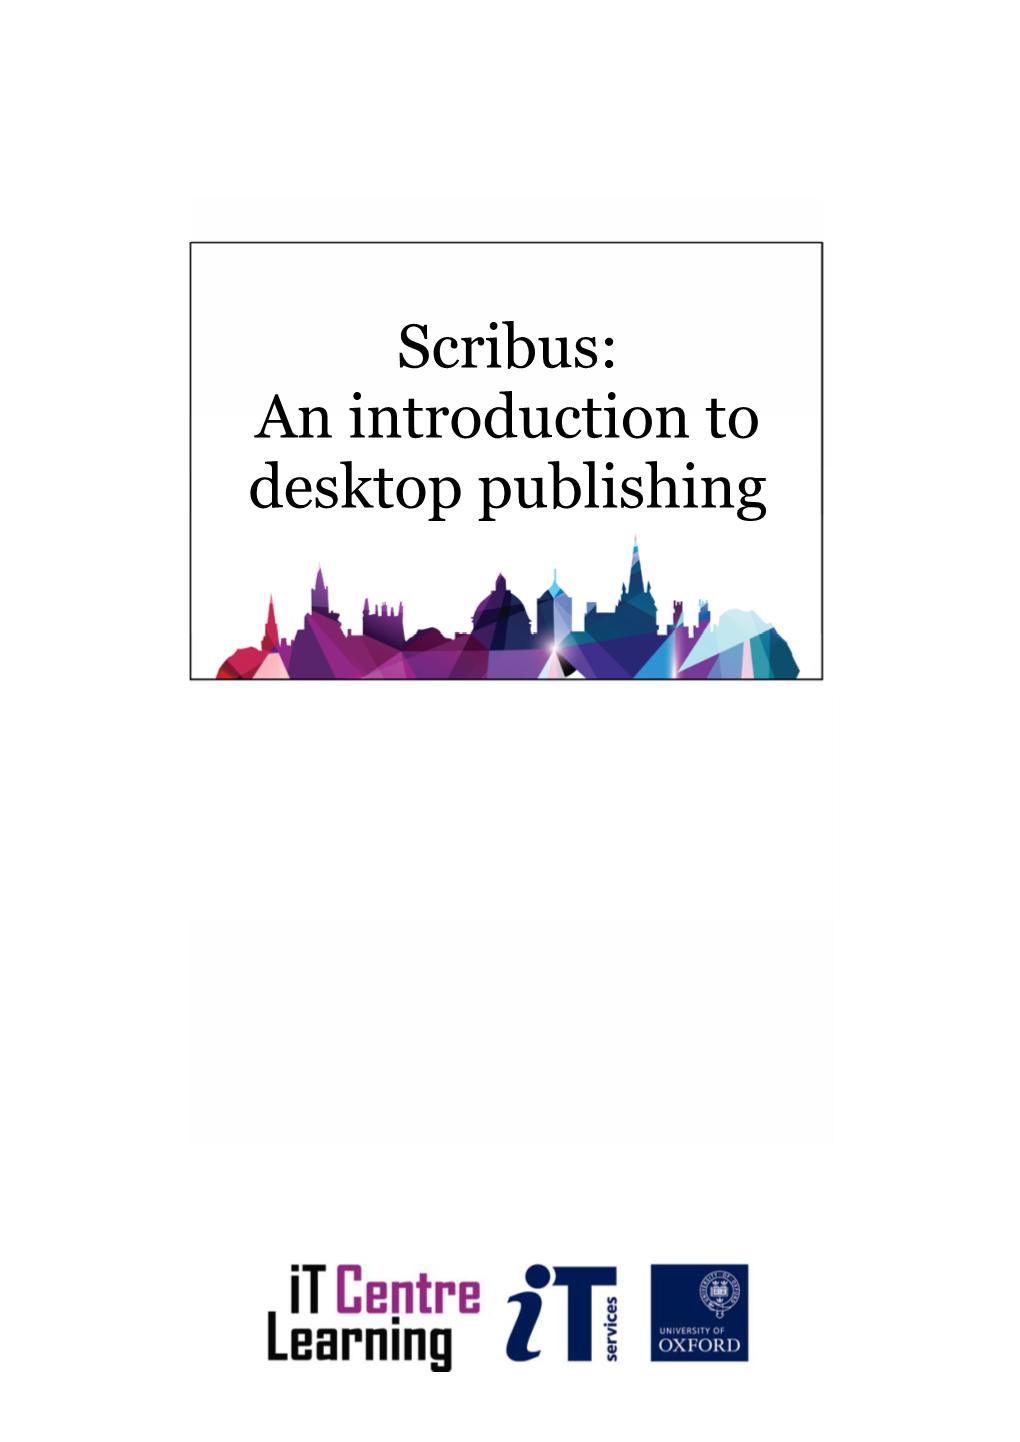 Scribus: an Introduction to Desktop Publishing